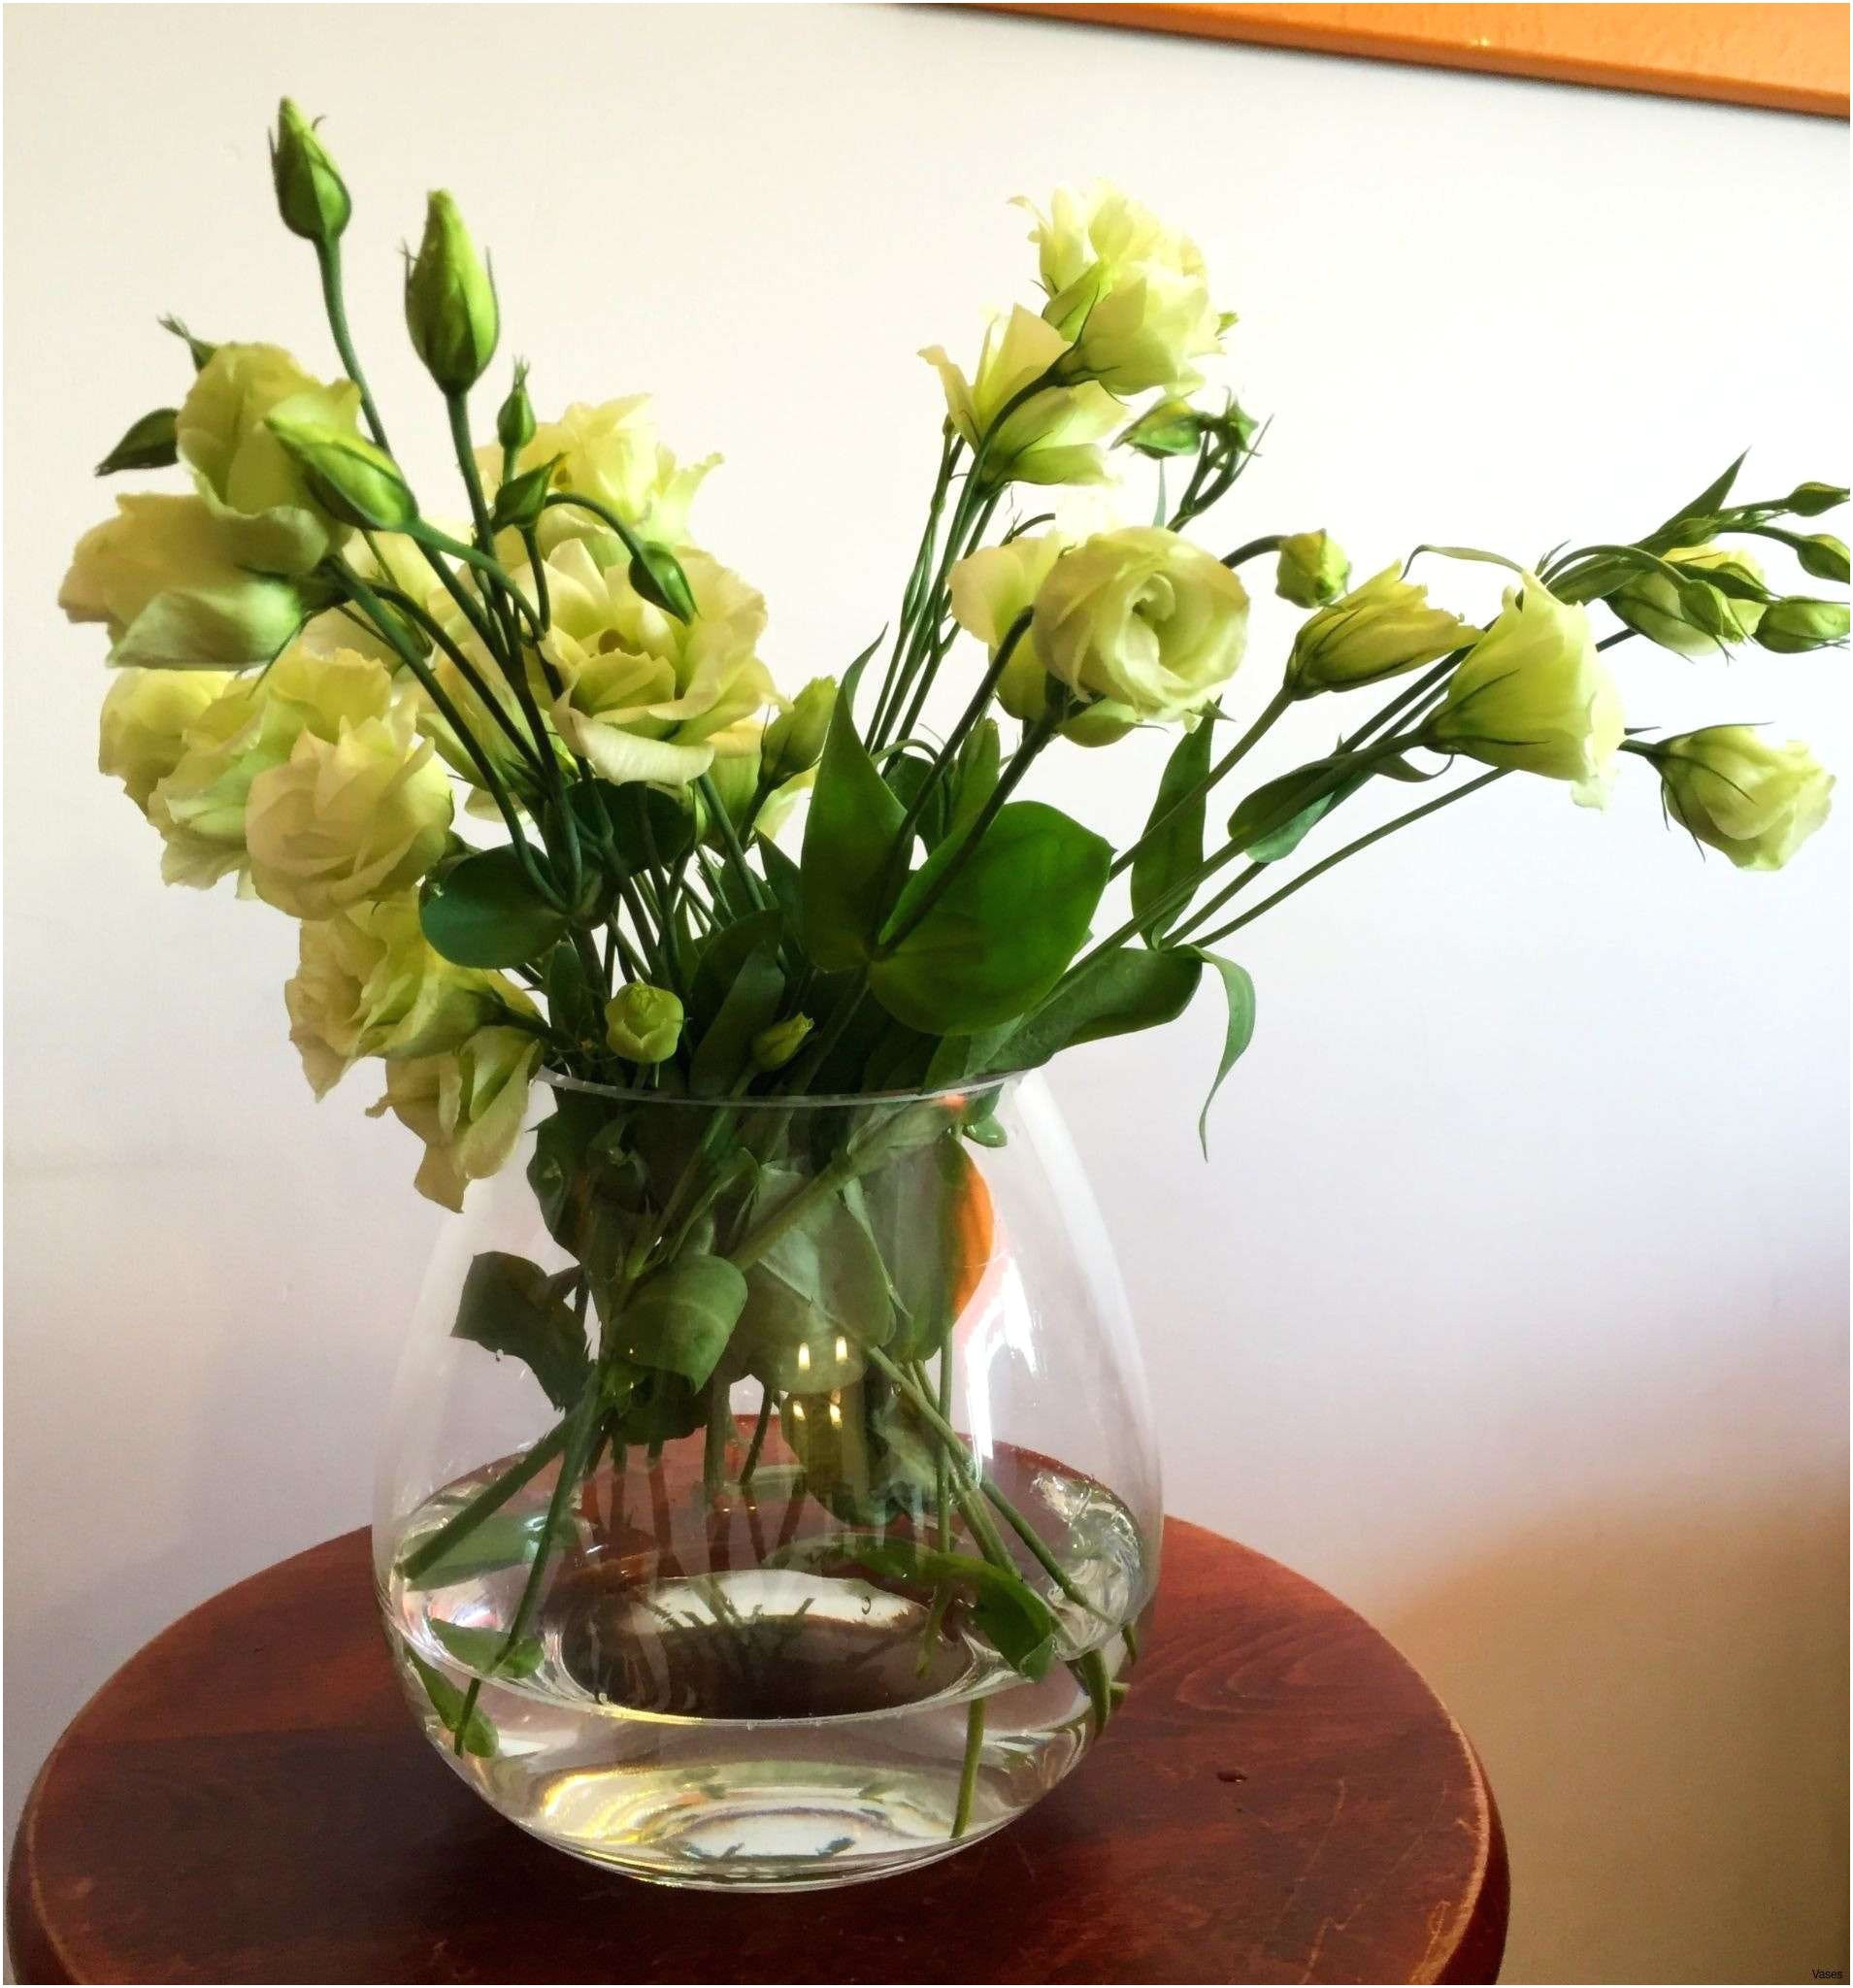 27 Wonderful Tall Vase with Sticks 2023 free download tall vase with sticks of tall green glass vase image tiger height awful flower vase table 04h intended for tall green glass vase image tiger height awful flower vase table 04h vases tablei 0